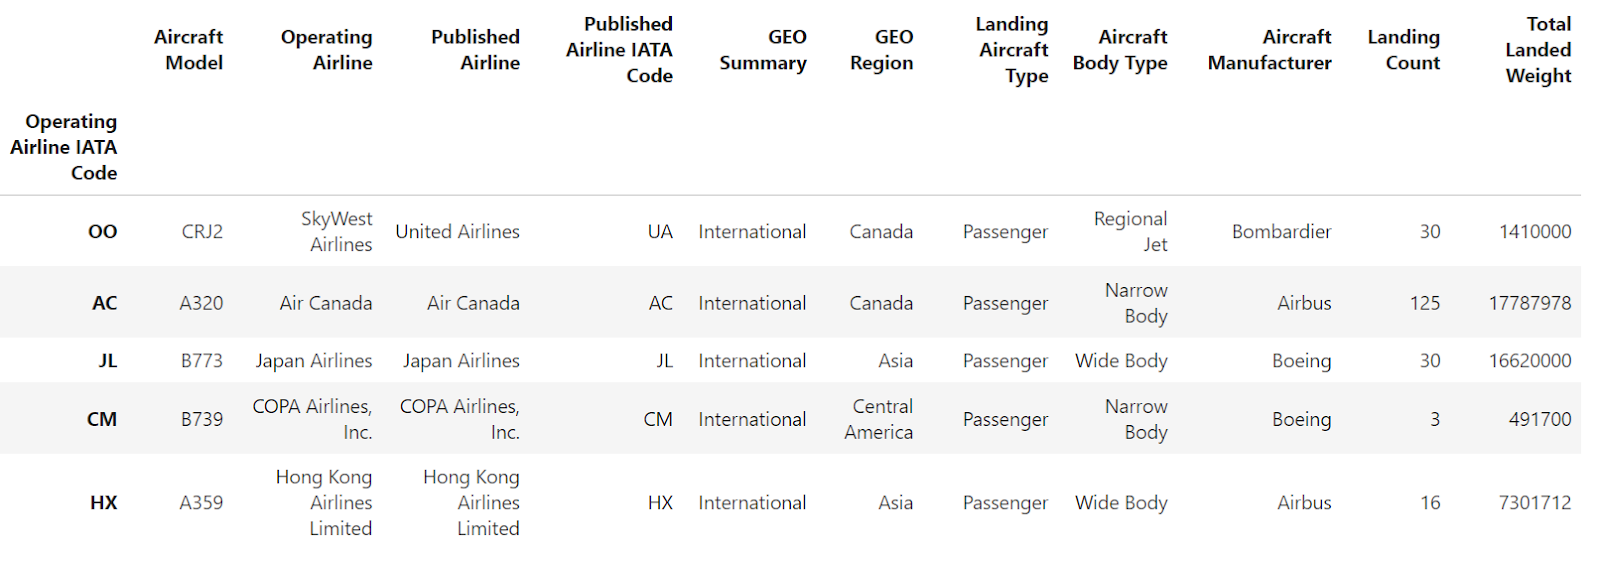 Operating Airline IATA Code is only remains as the index